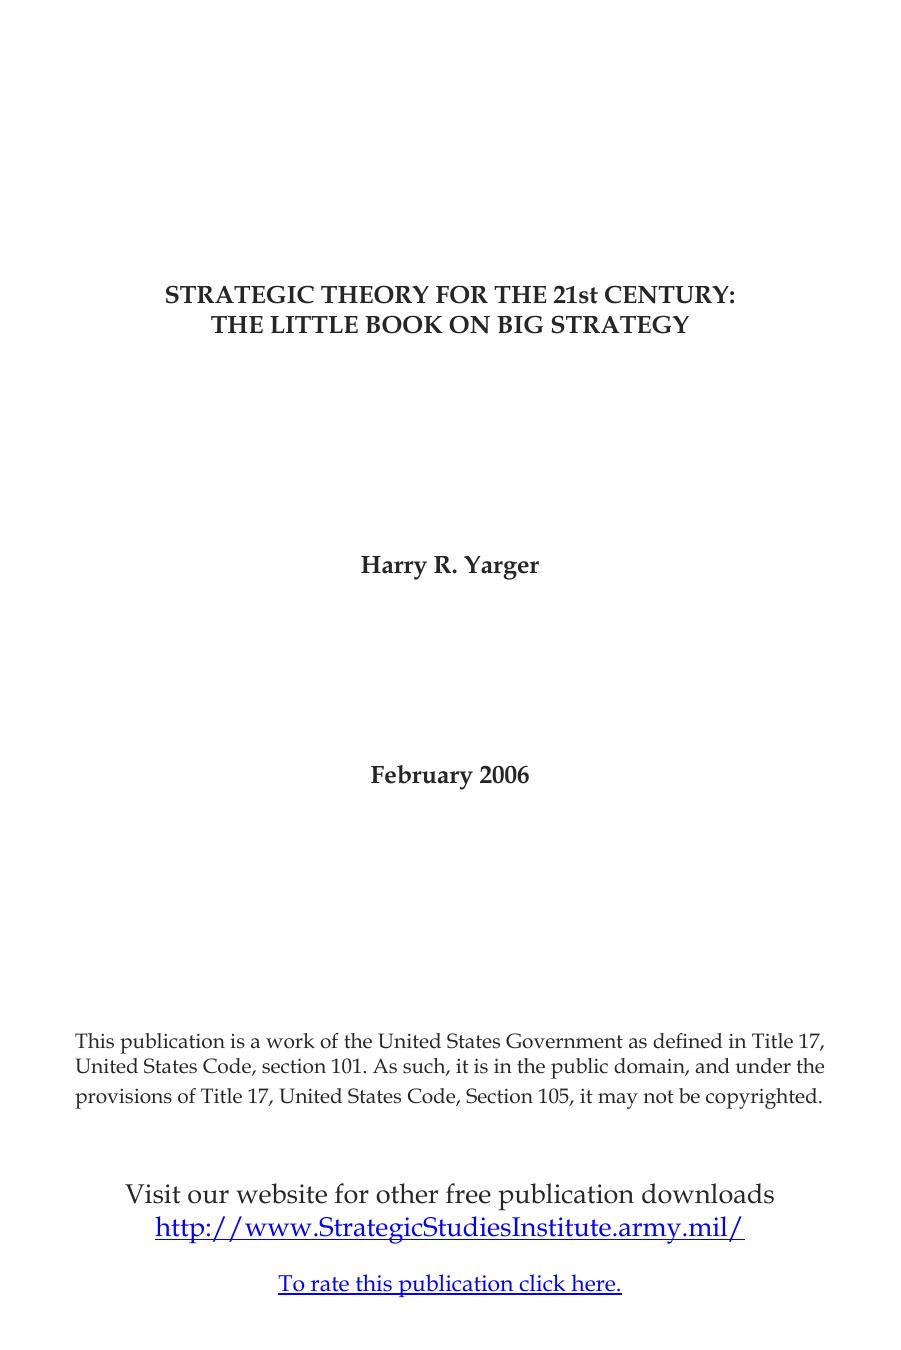 Strategic Theory for the 21st Century